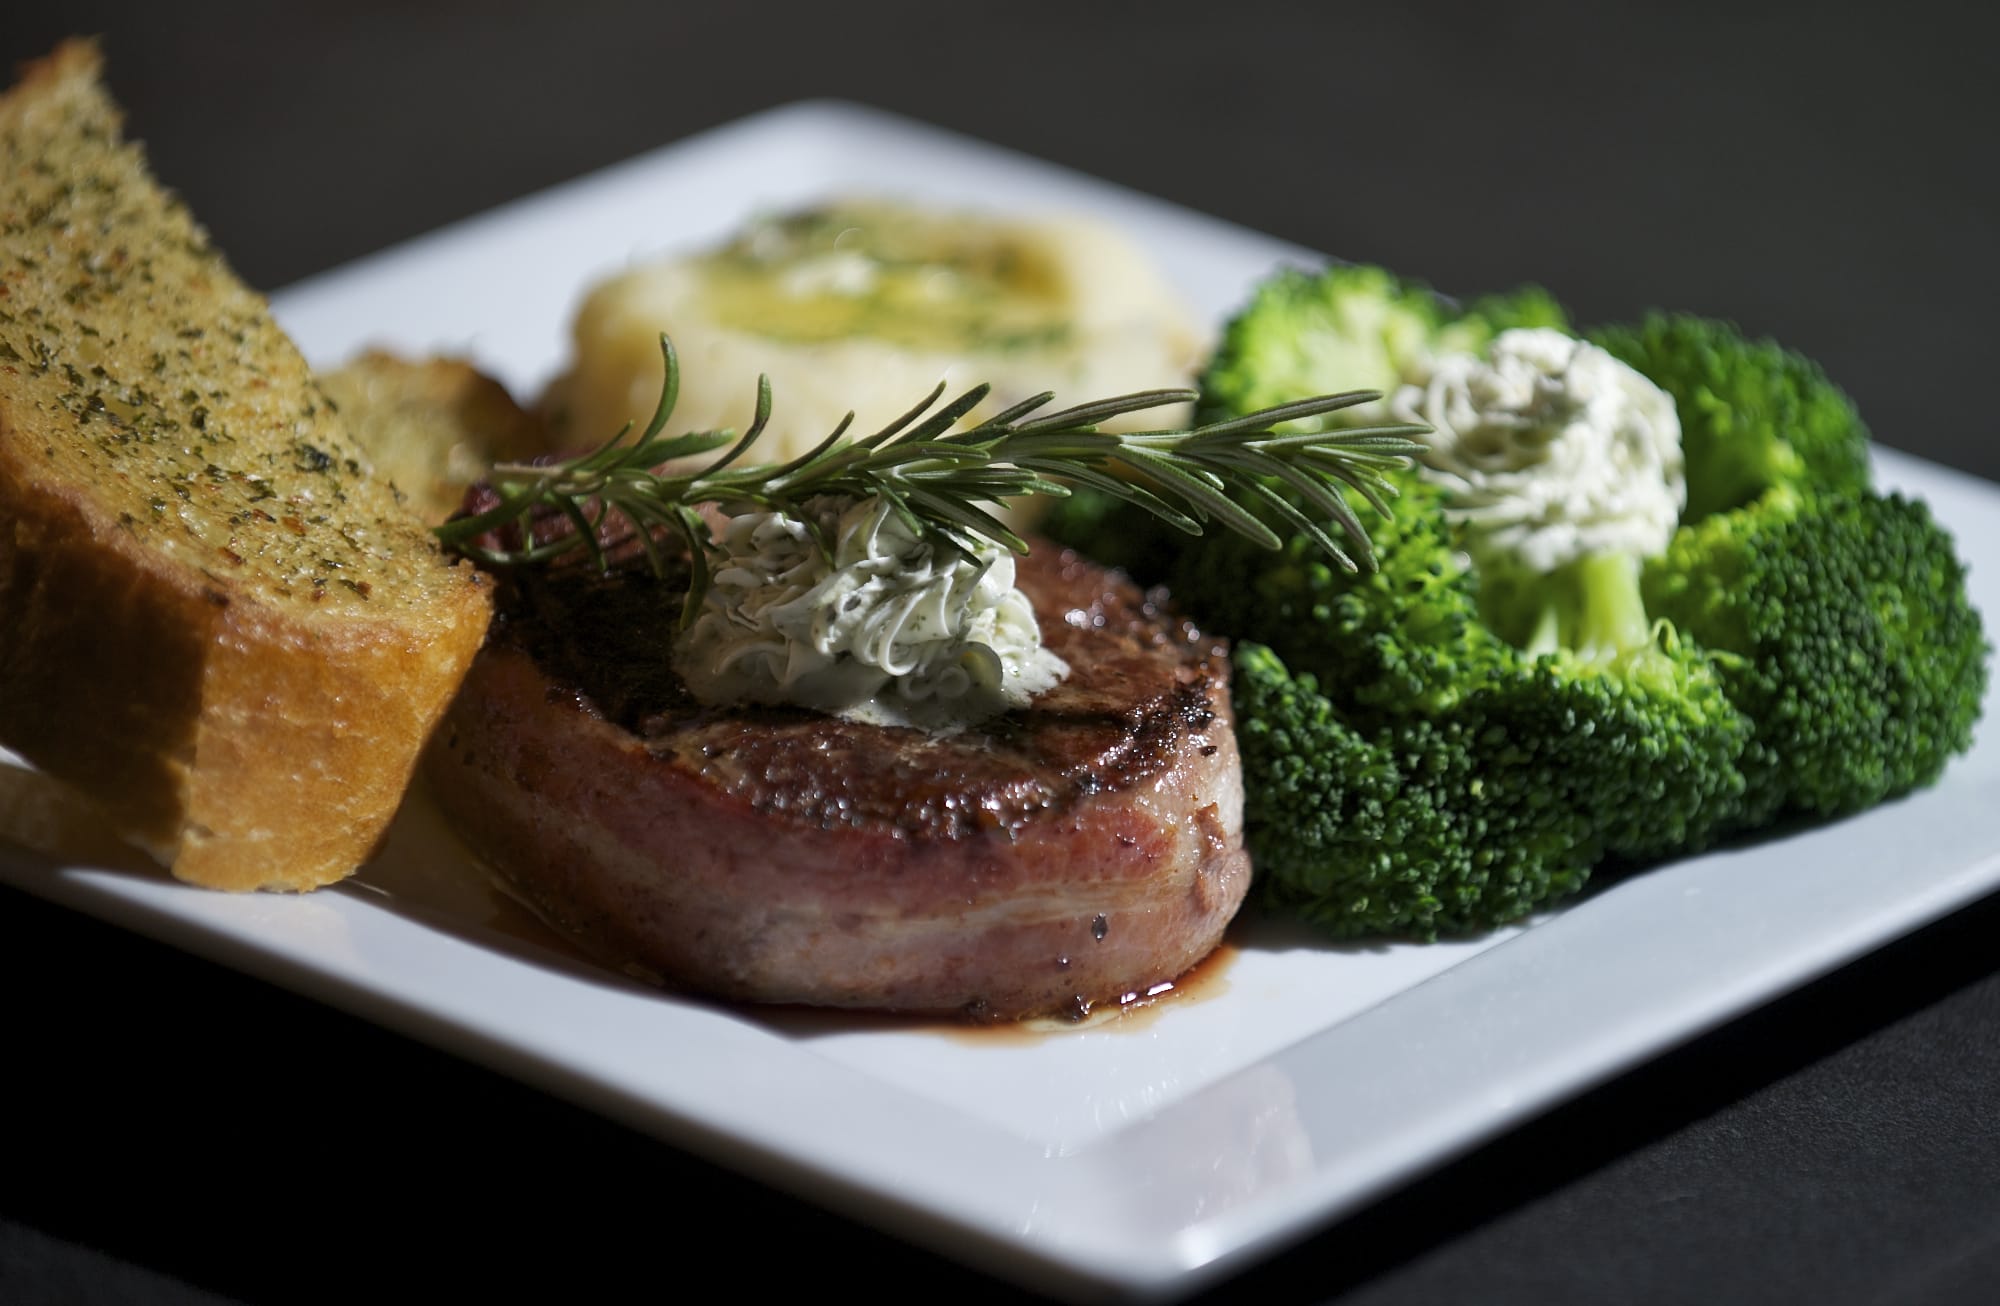 Filet mignon with mashed potatoes and broccoli is pictured March 14 at Billy Blues Bar and Grill in Vancouver.